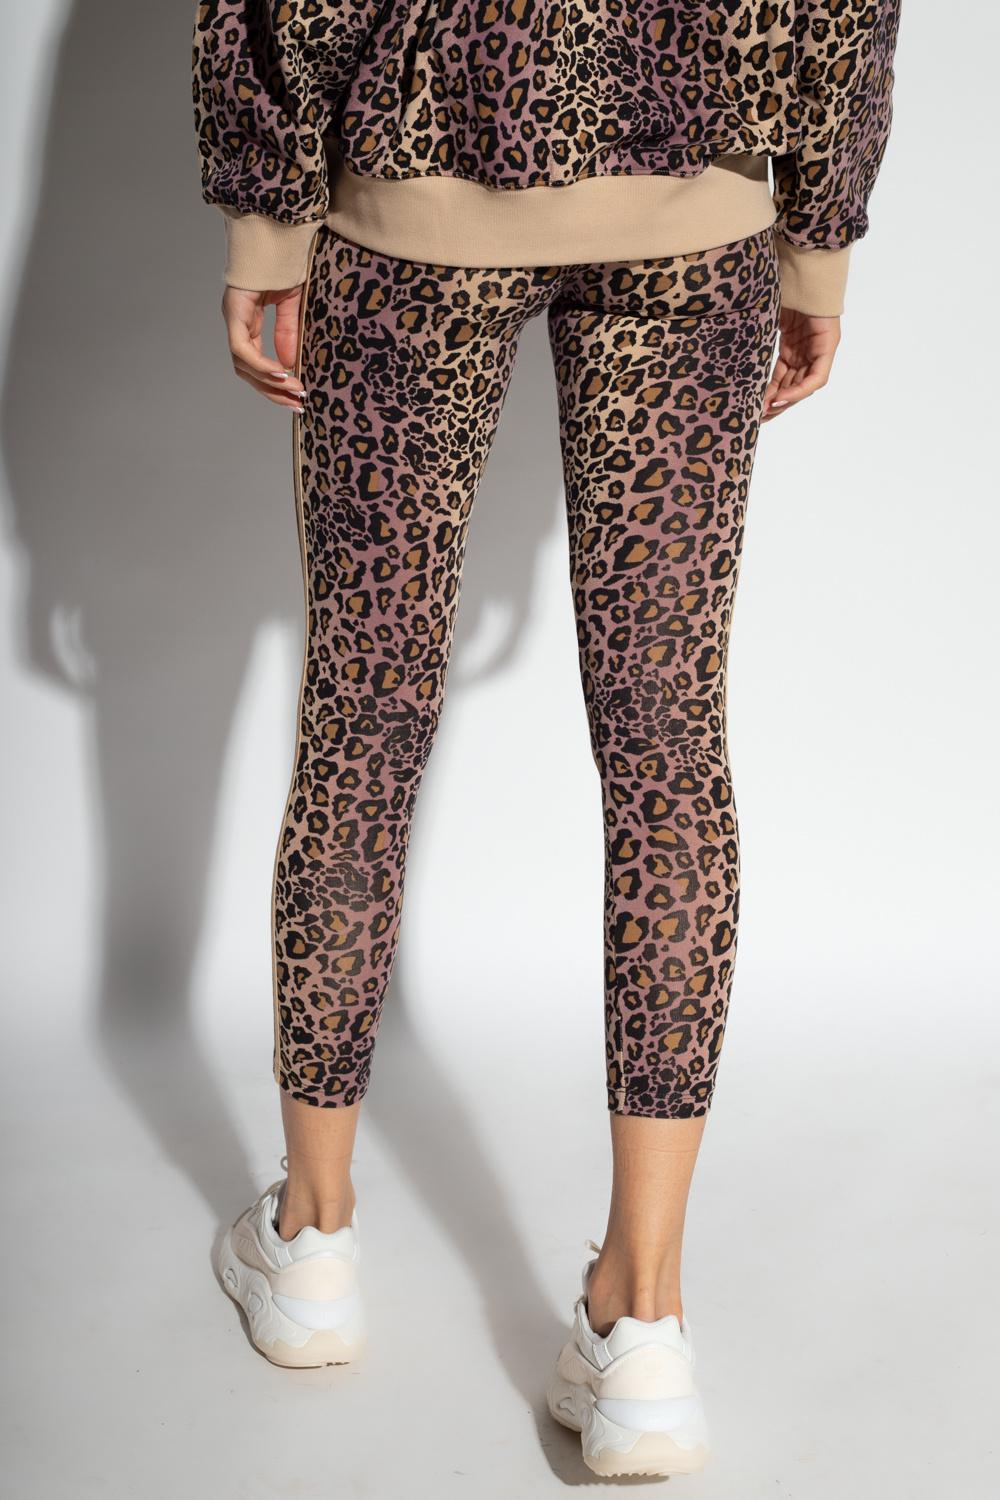 adidas Originals Leggings With Animal Pattern in Natural | Lyst